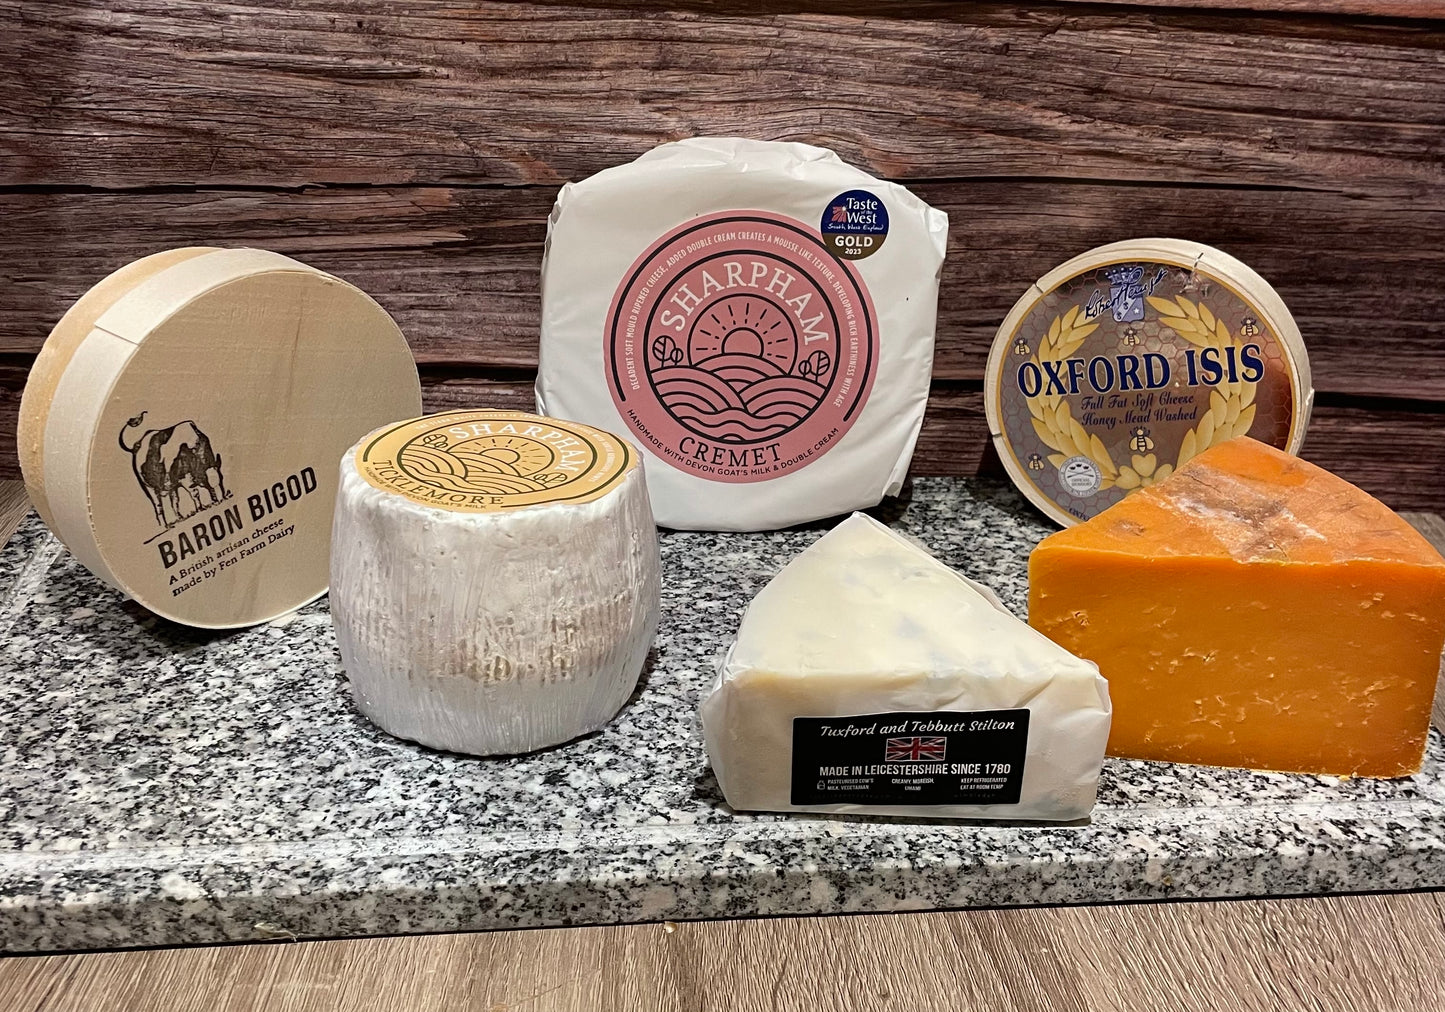 6 Cheese Set - 2.11kg for 20 people, or 10 people over 2 days, 6 people over 3 days.